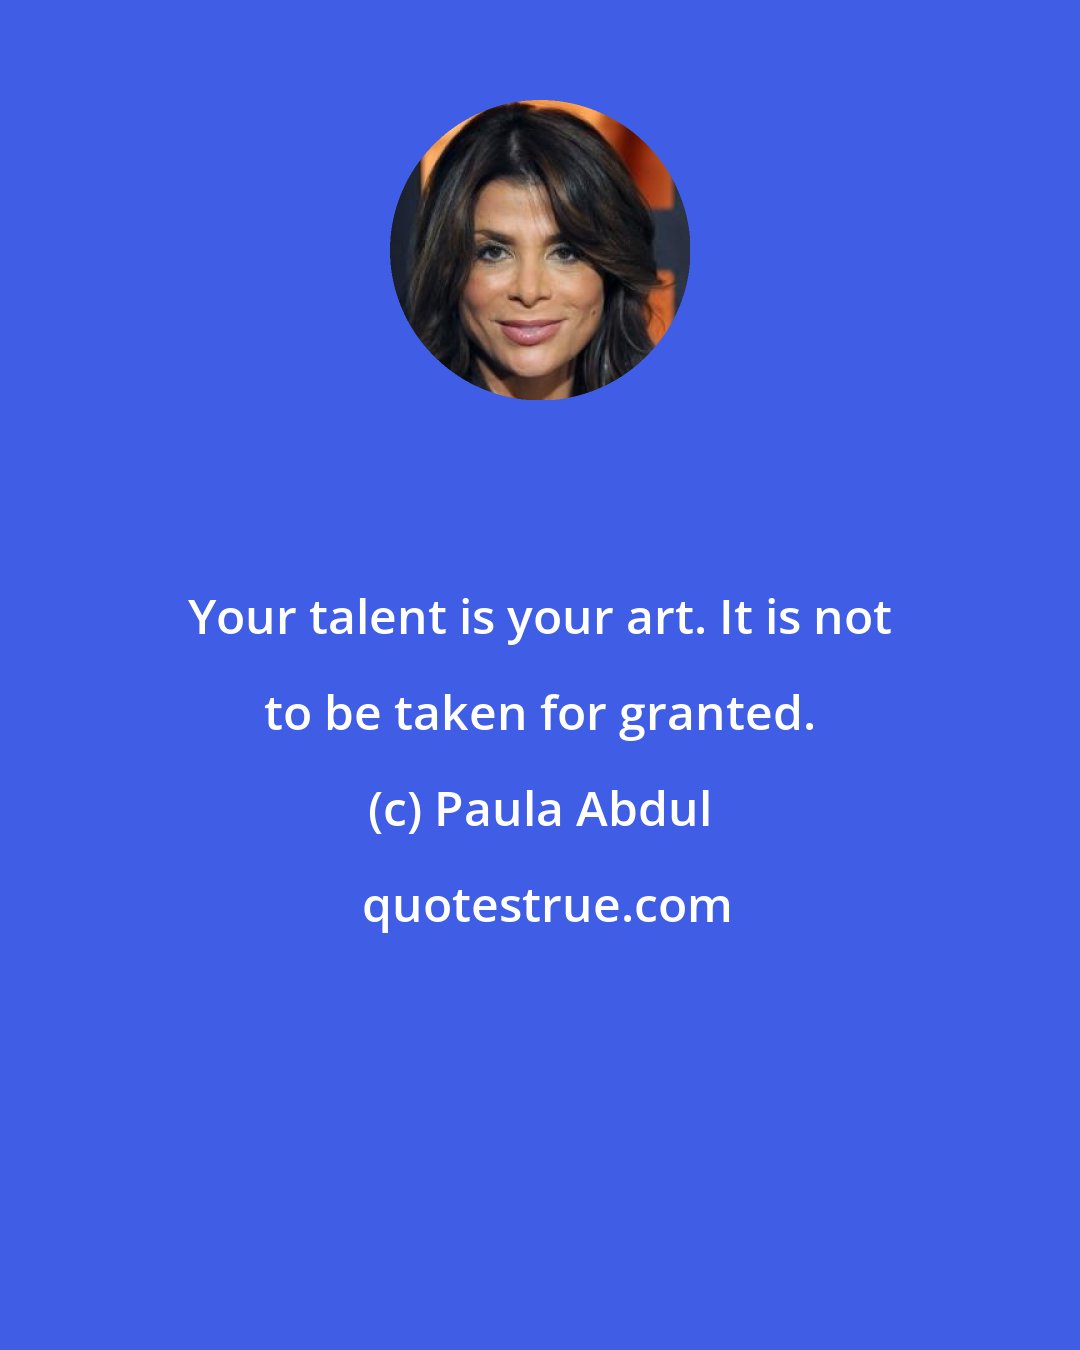 Paula Abdul: Your talent is your art. It is not to be taken for granted.